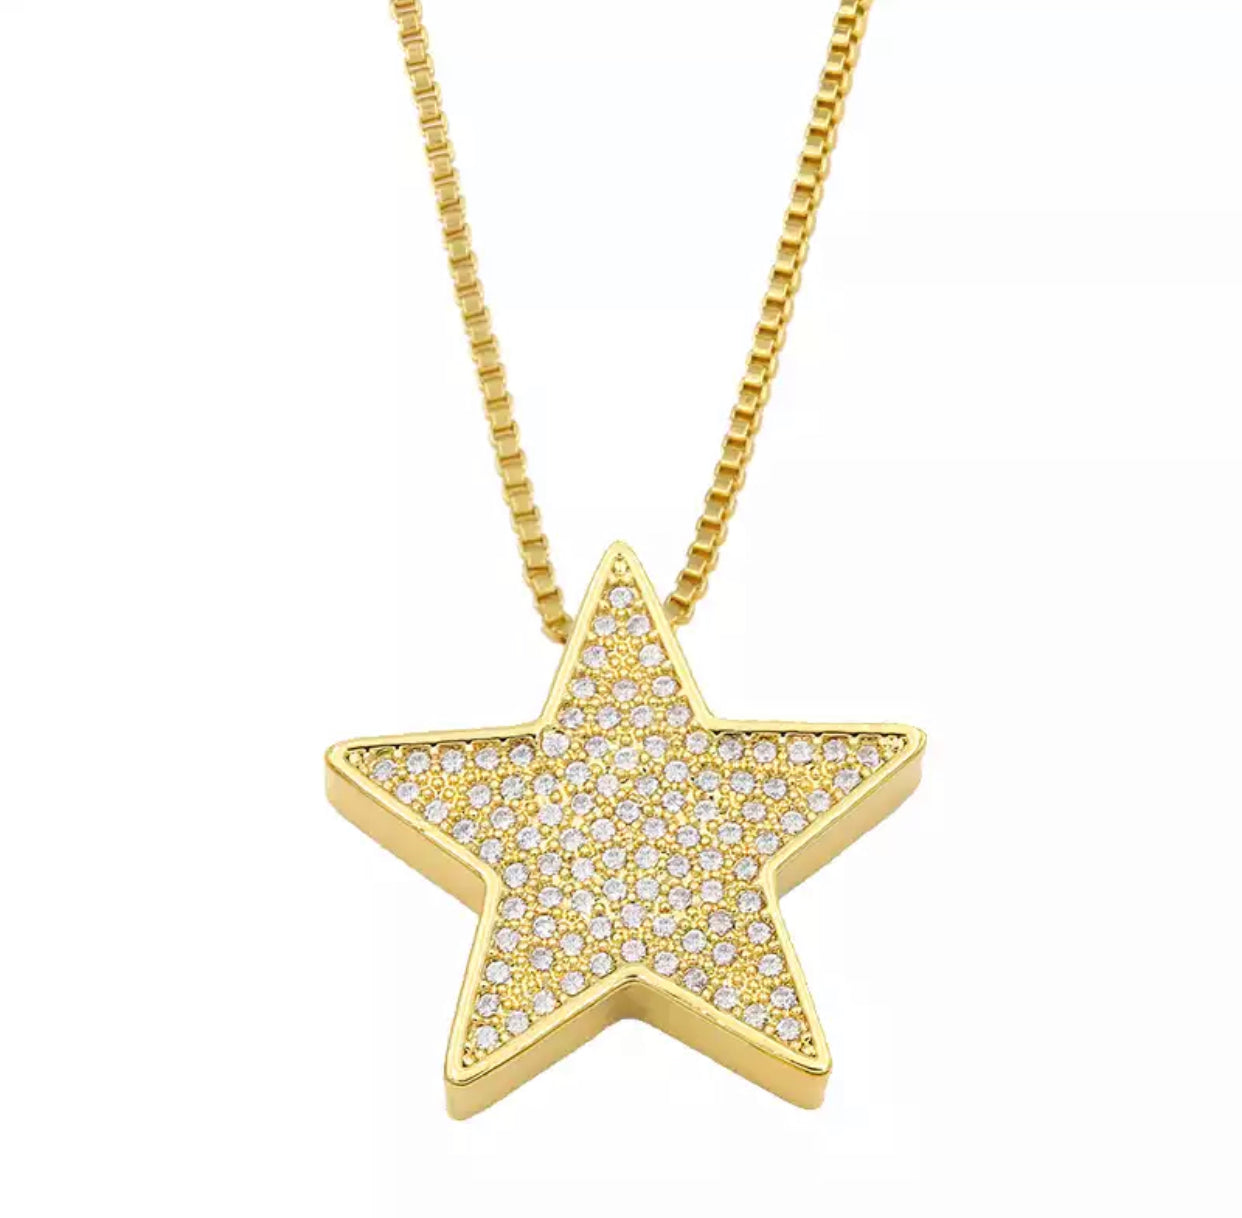 Gold Plated necklace features a gold star embellished with clear pave crystals